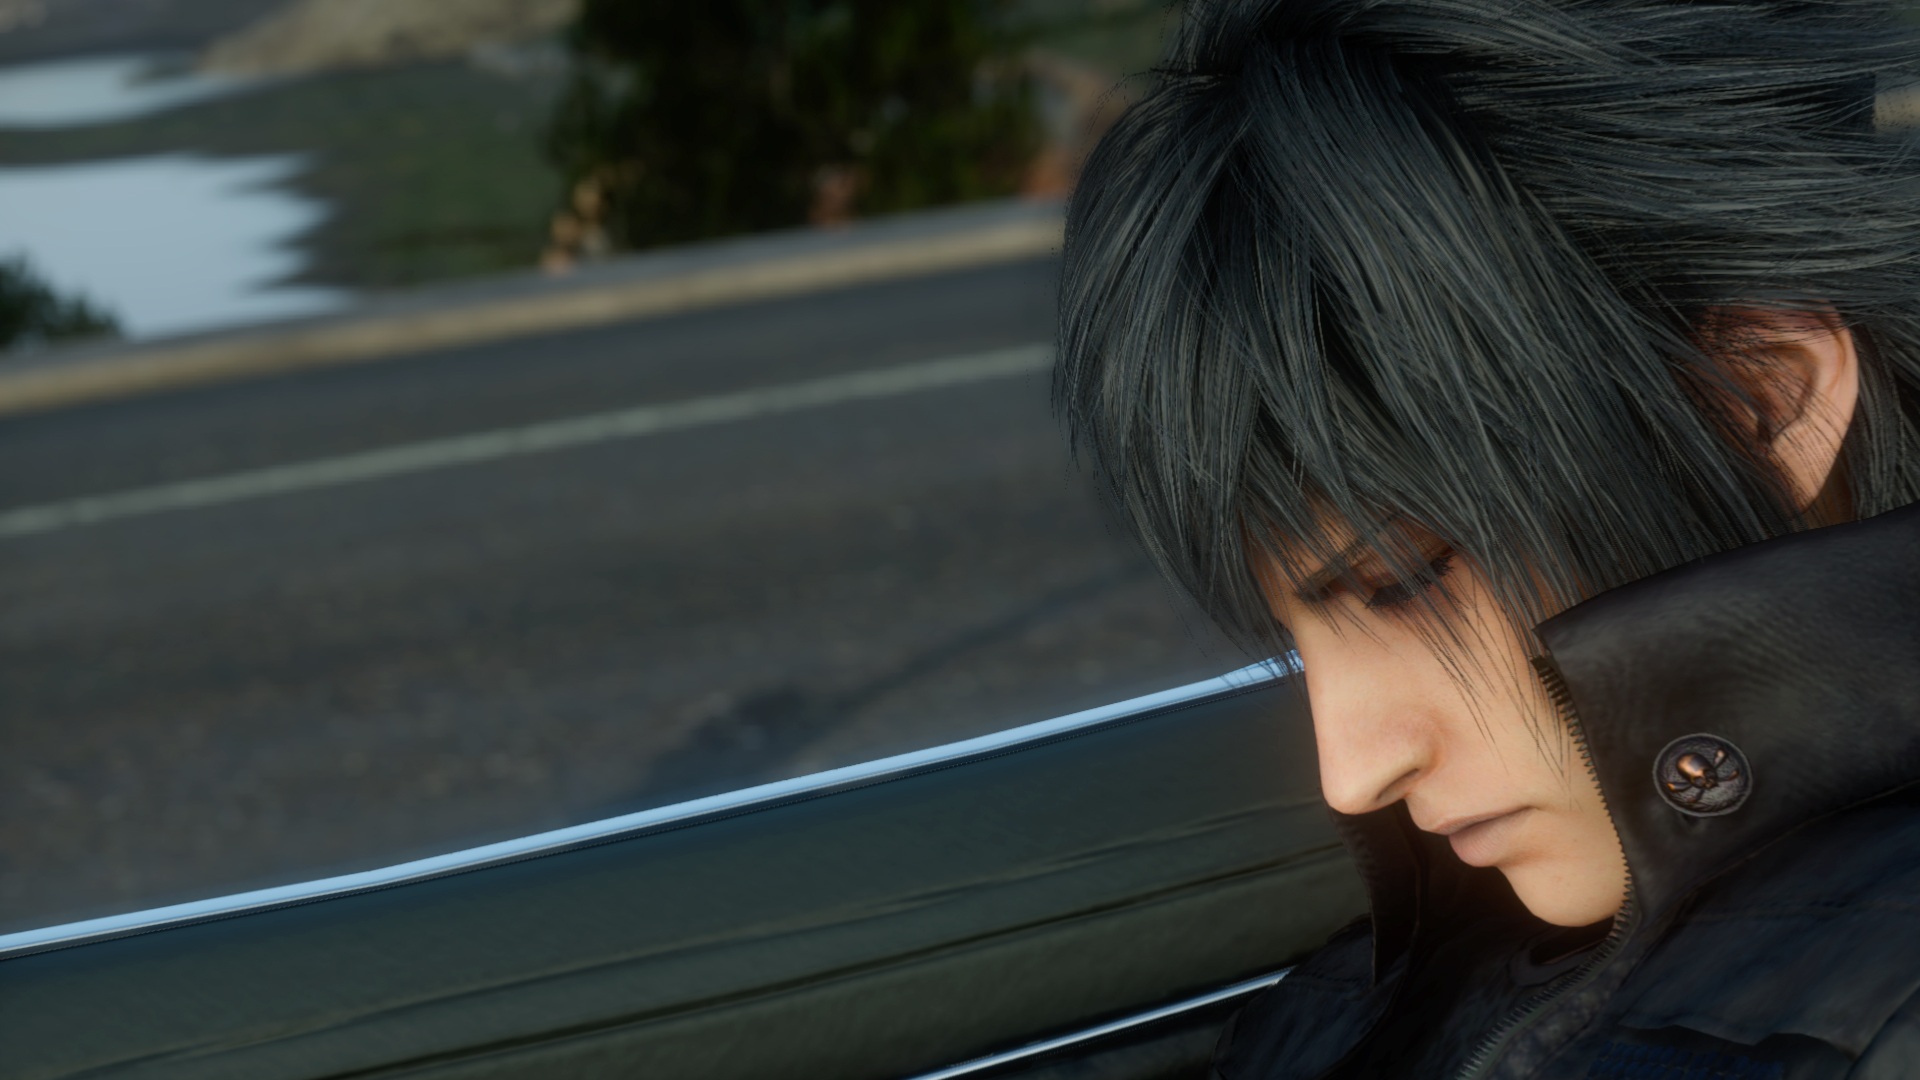 Brotherhood: Final Fantasy XV's Fifth Episode Coming at Tokyo Game Show;  Screenshots and Art Released